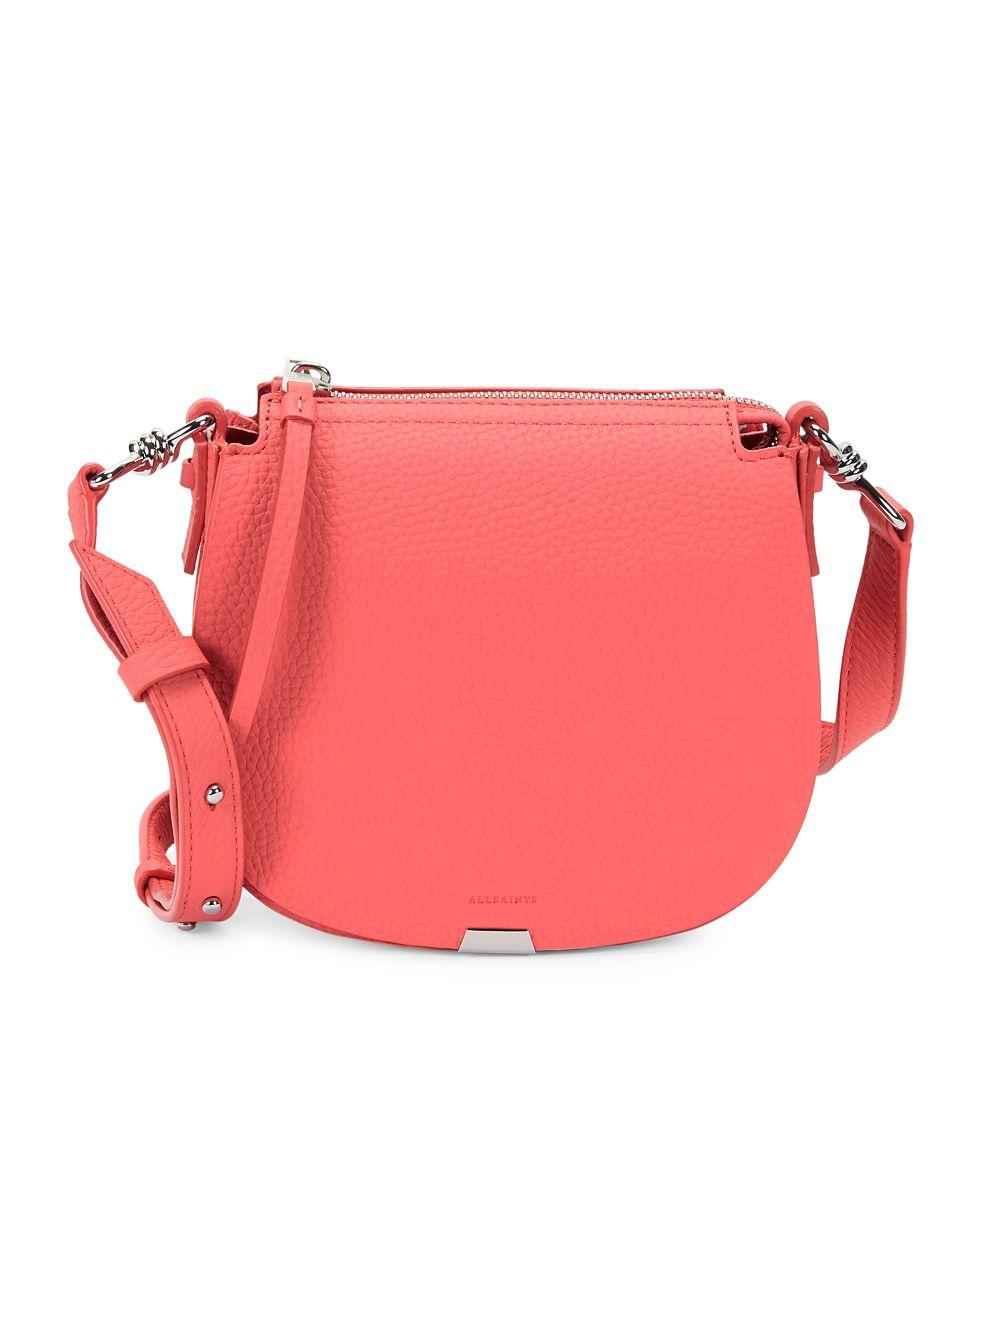 AllSaints Captain Round Leather Crossbody Bag in Pink - Lyst